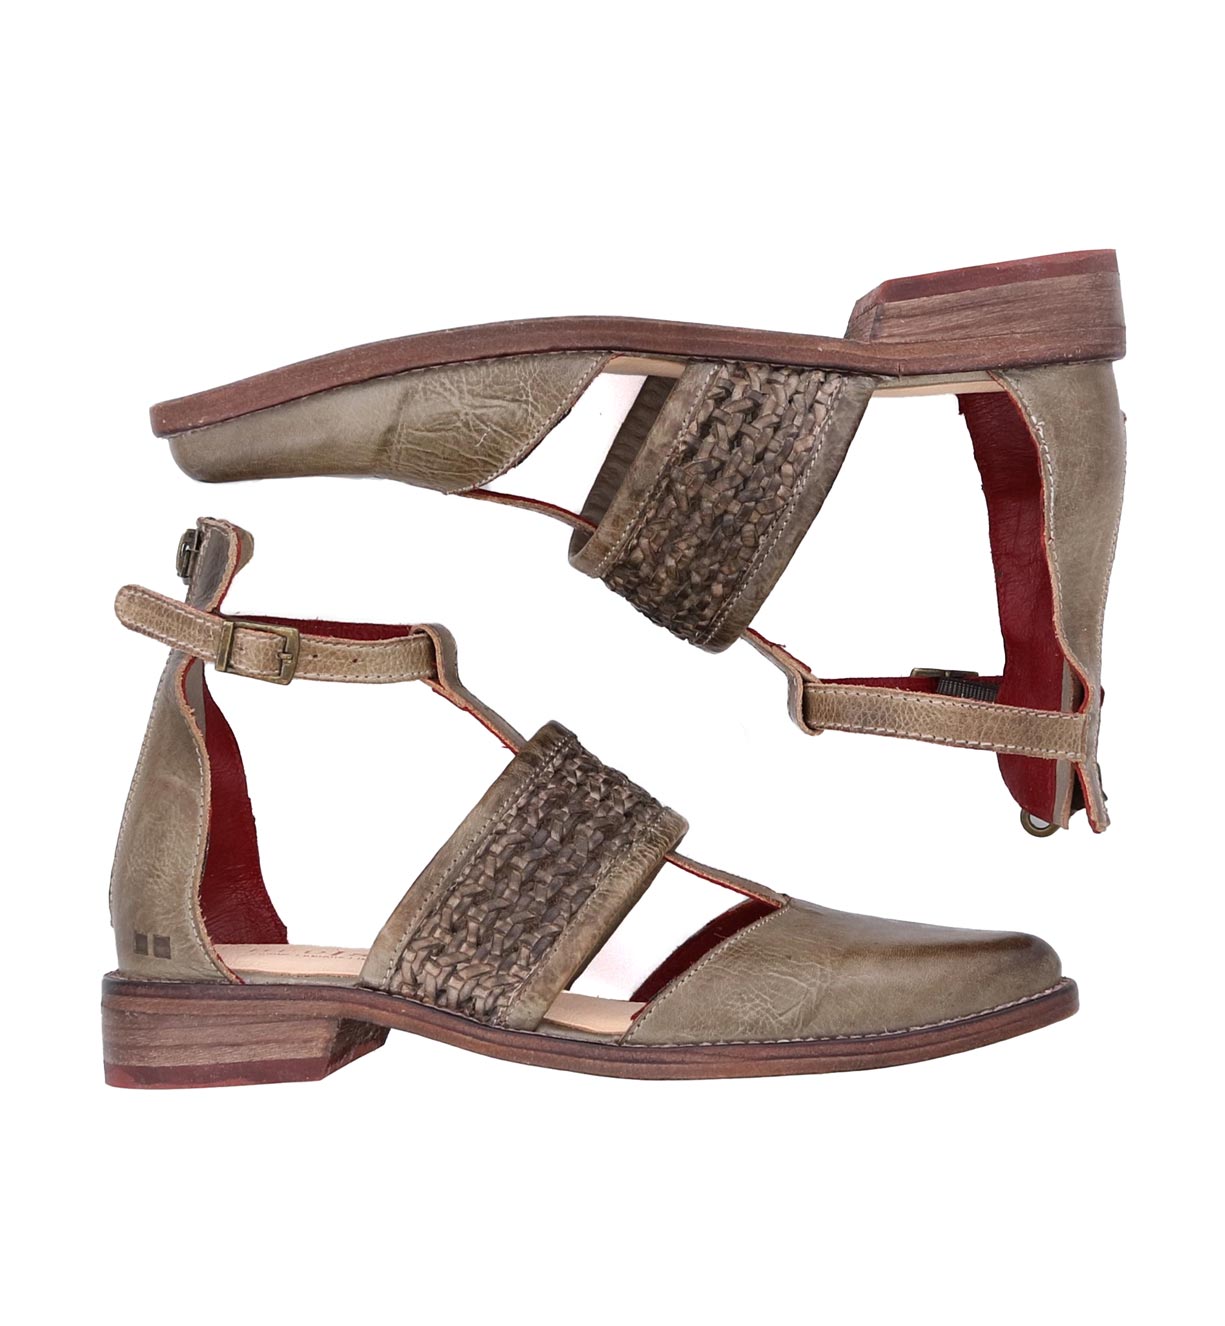 A pair of Bed Stu Bethany II women's sandals with straps and buckles.